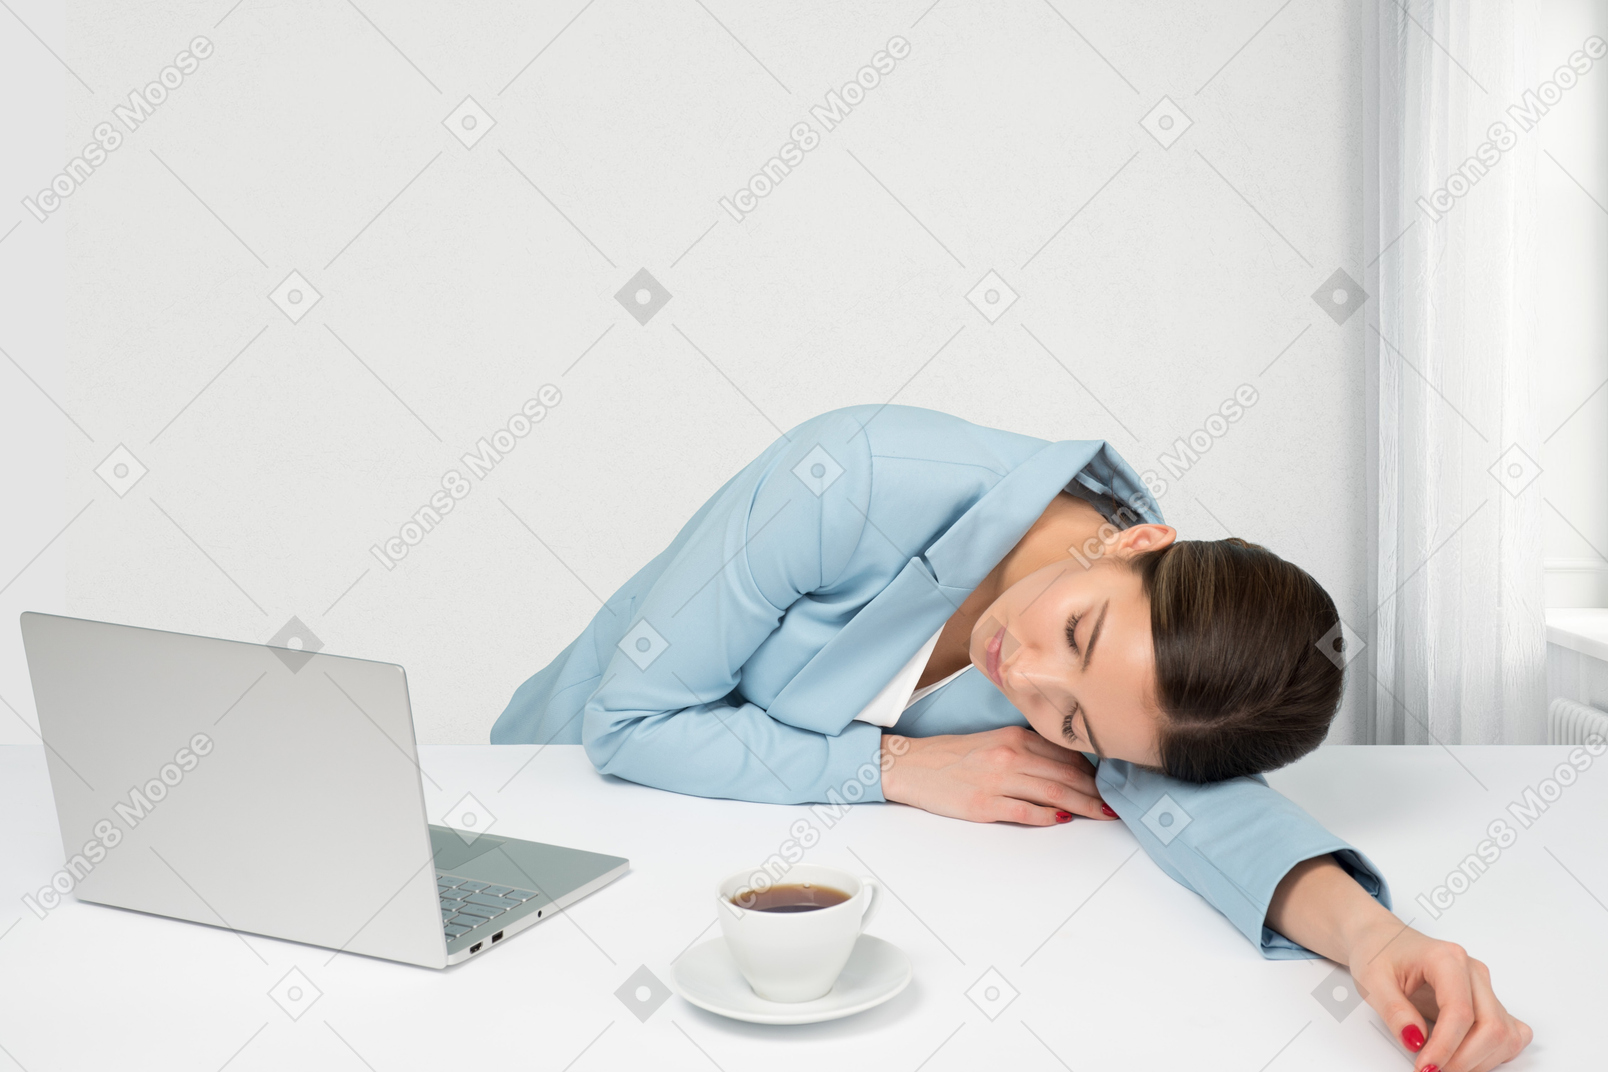 A woman laying her head on her desk next to a laptop